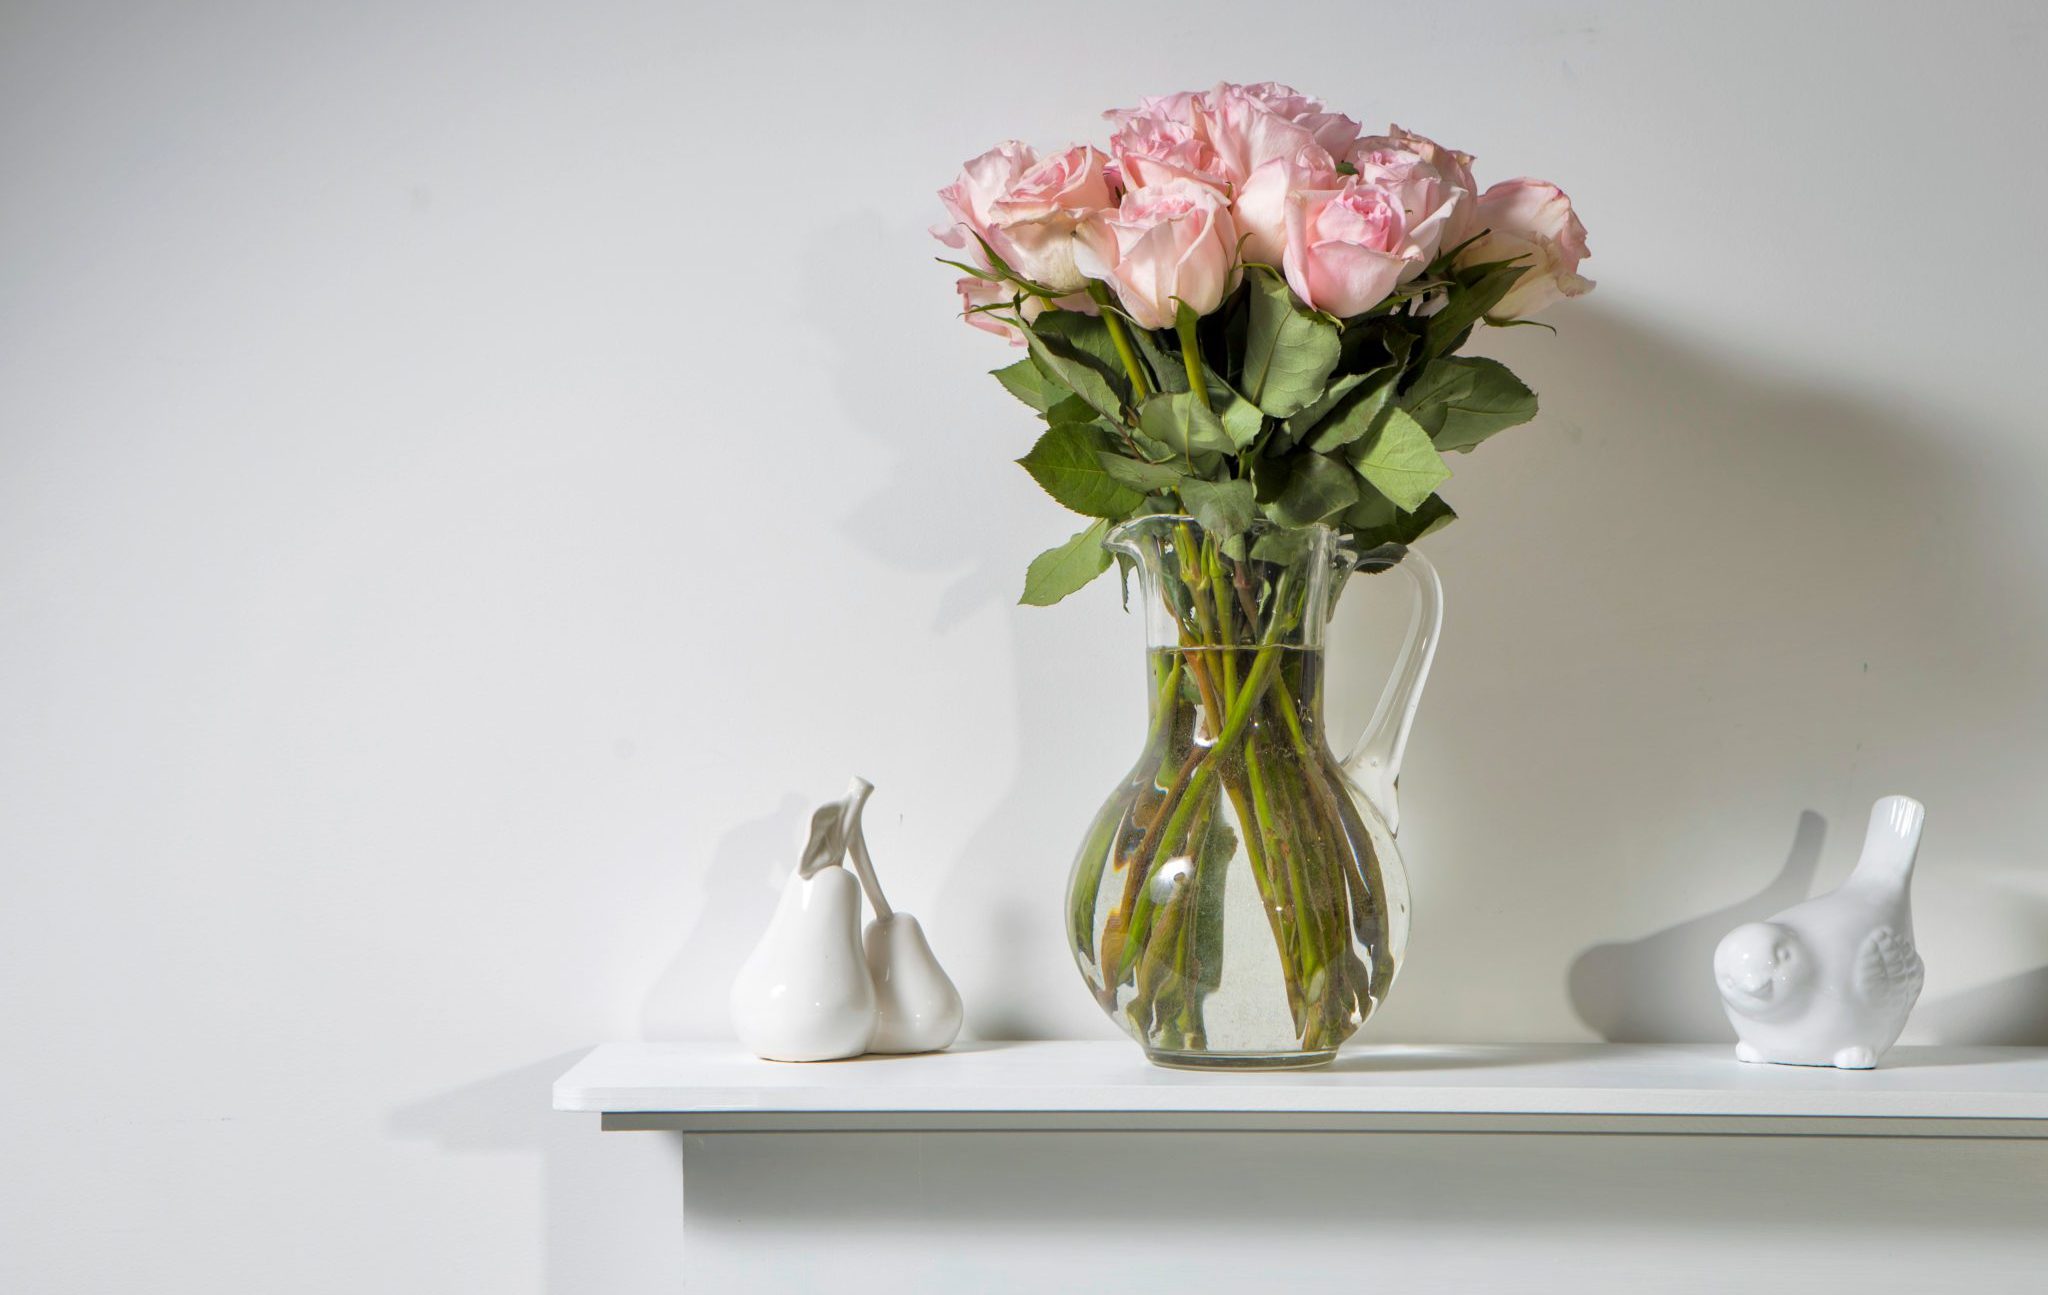 Bouquet,Of,Pink,Roses,In,A,Glass,Figured,Vase,On